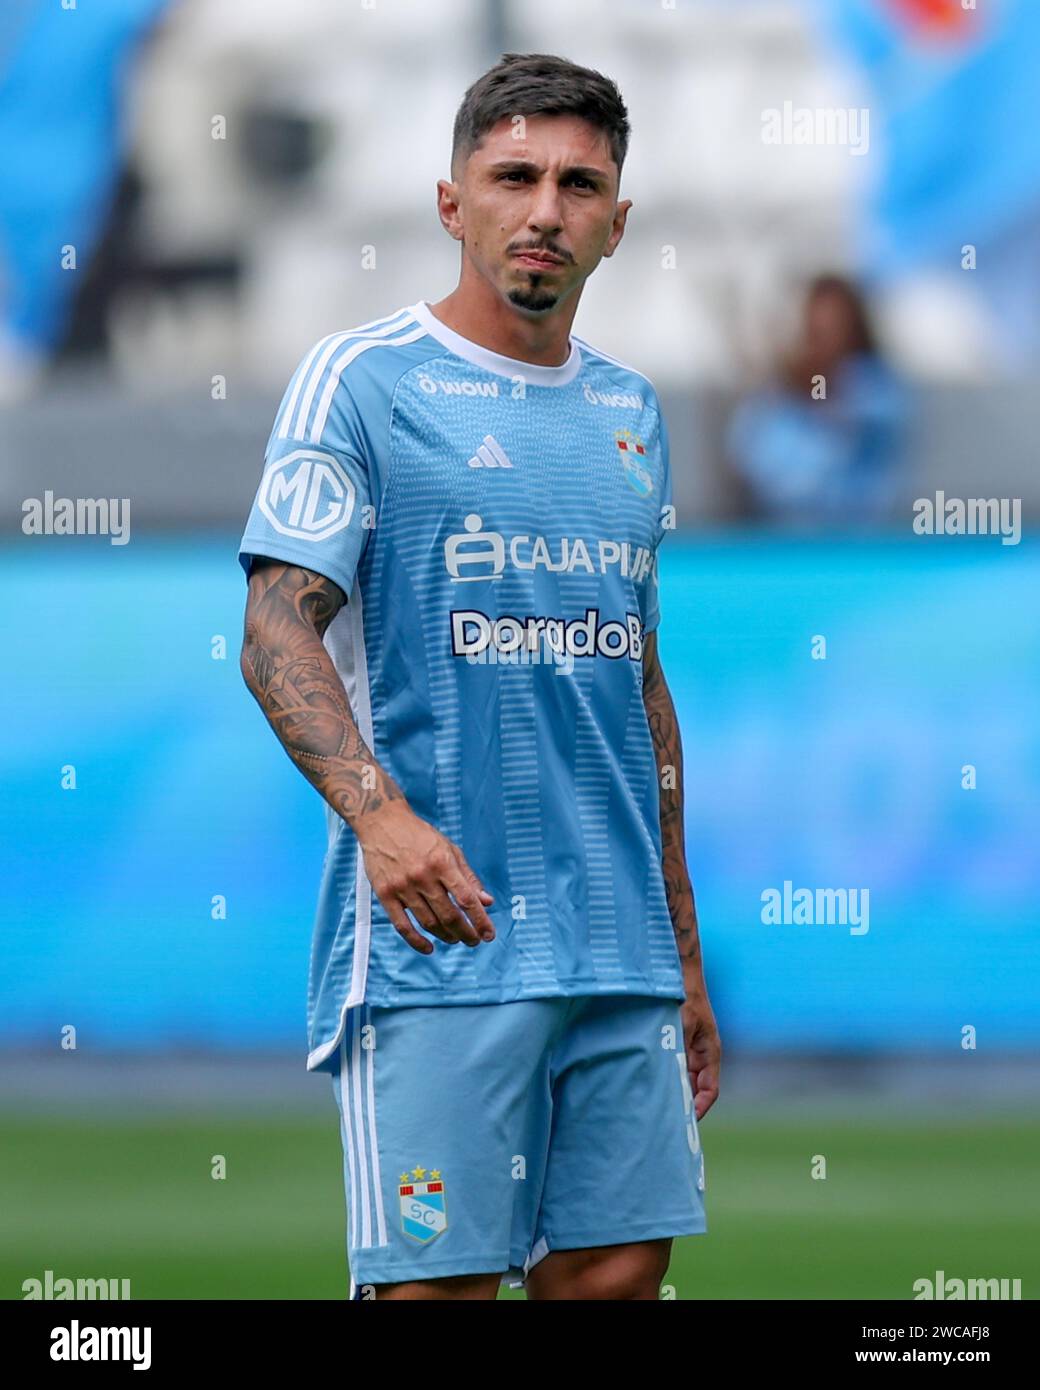 Lima, Peru. 14th Jan, 2024. Gustavo Cazonatti of Sporting Cristal during the friendly match between Sporting Cristal and Universidad Catolica de Chile played at Nacional Stadium on January 14, 2024 in Lima, Peru. (Photo by Miguel Marrufo/PRESSINPHOTO) Credit: PRESSINPHOTO SPORTS AGENCY/Alamy Live News Stock Photo